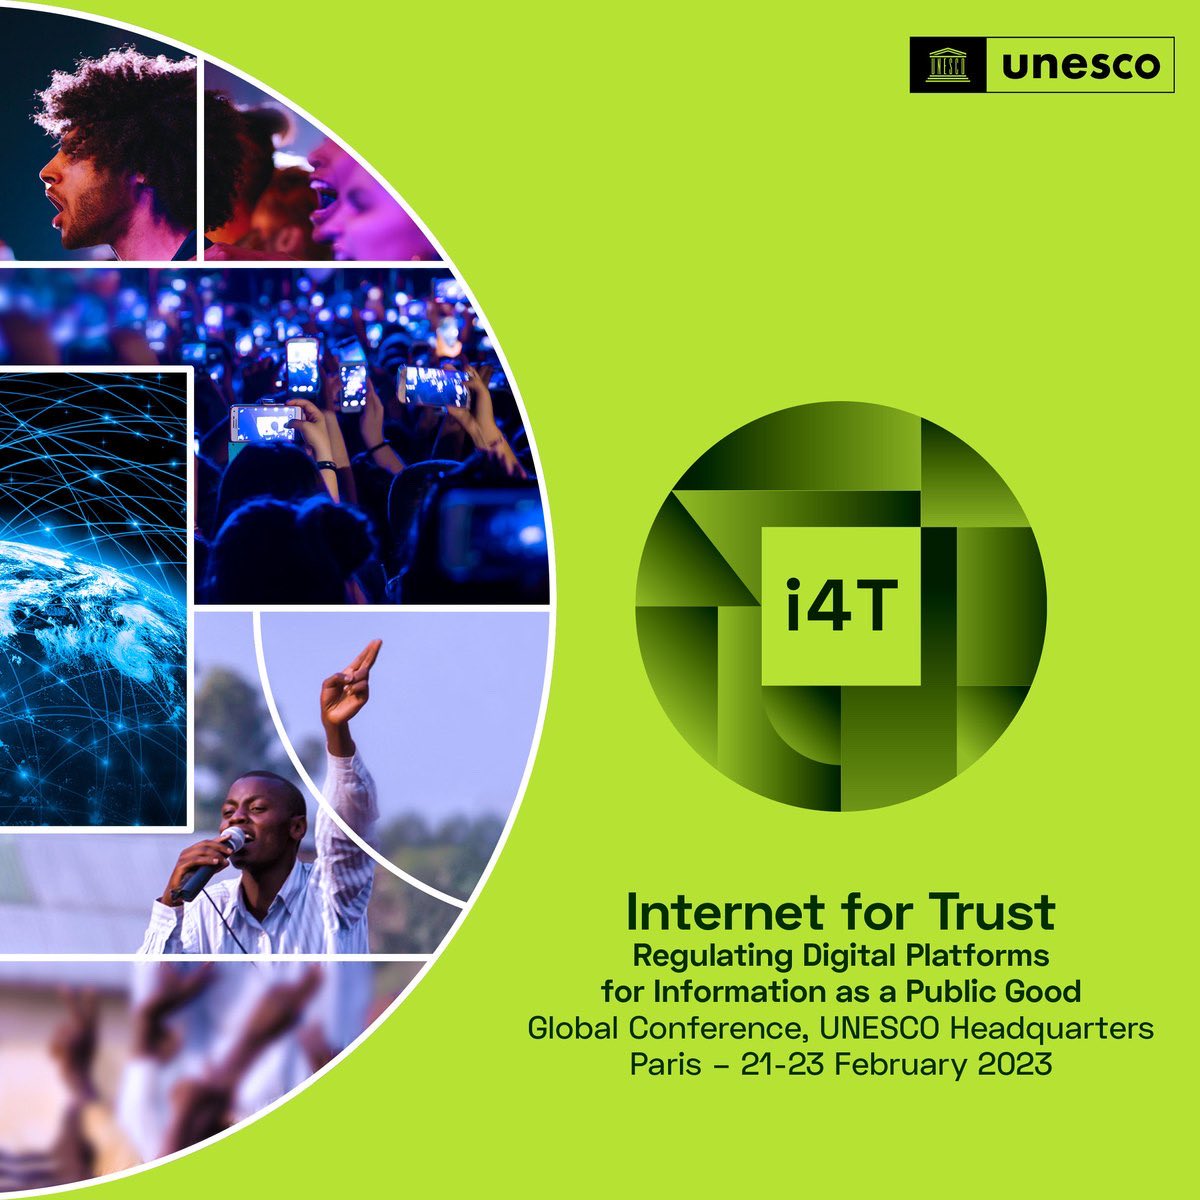 UNESCO Global Conference “Internet for Trust”